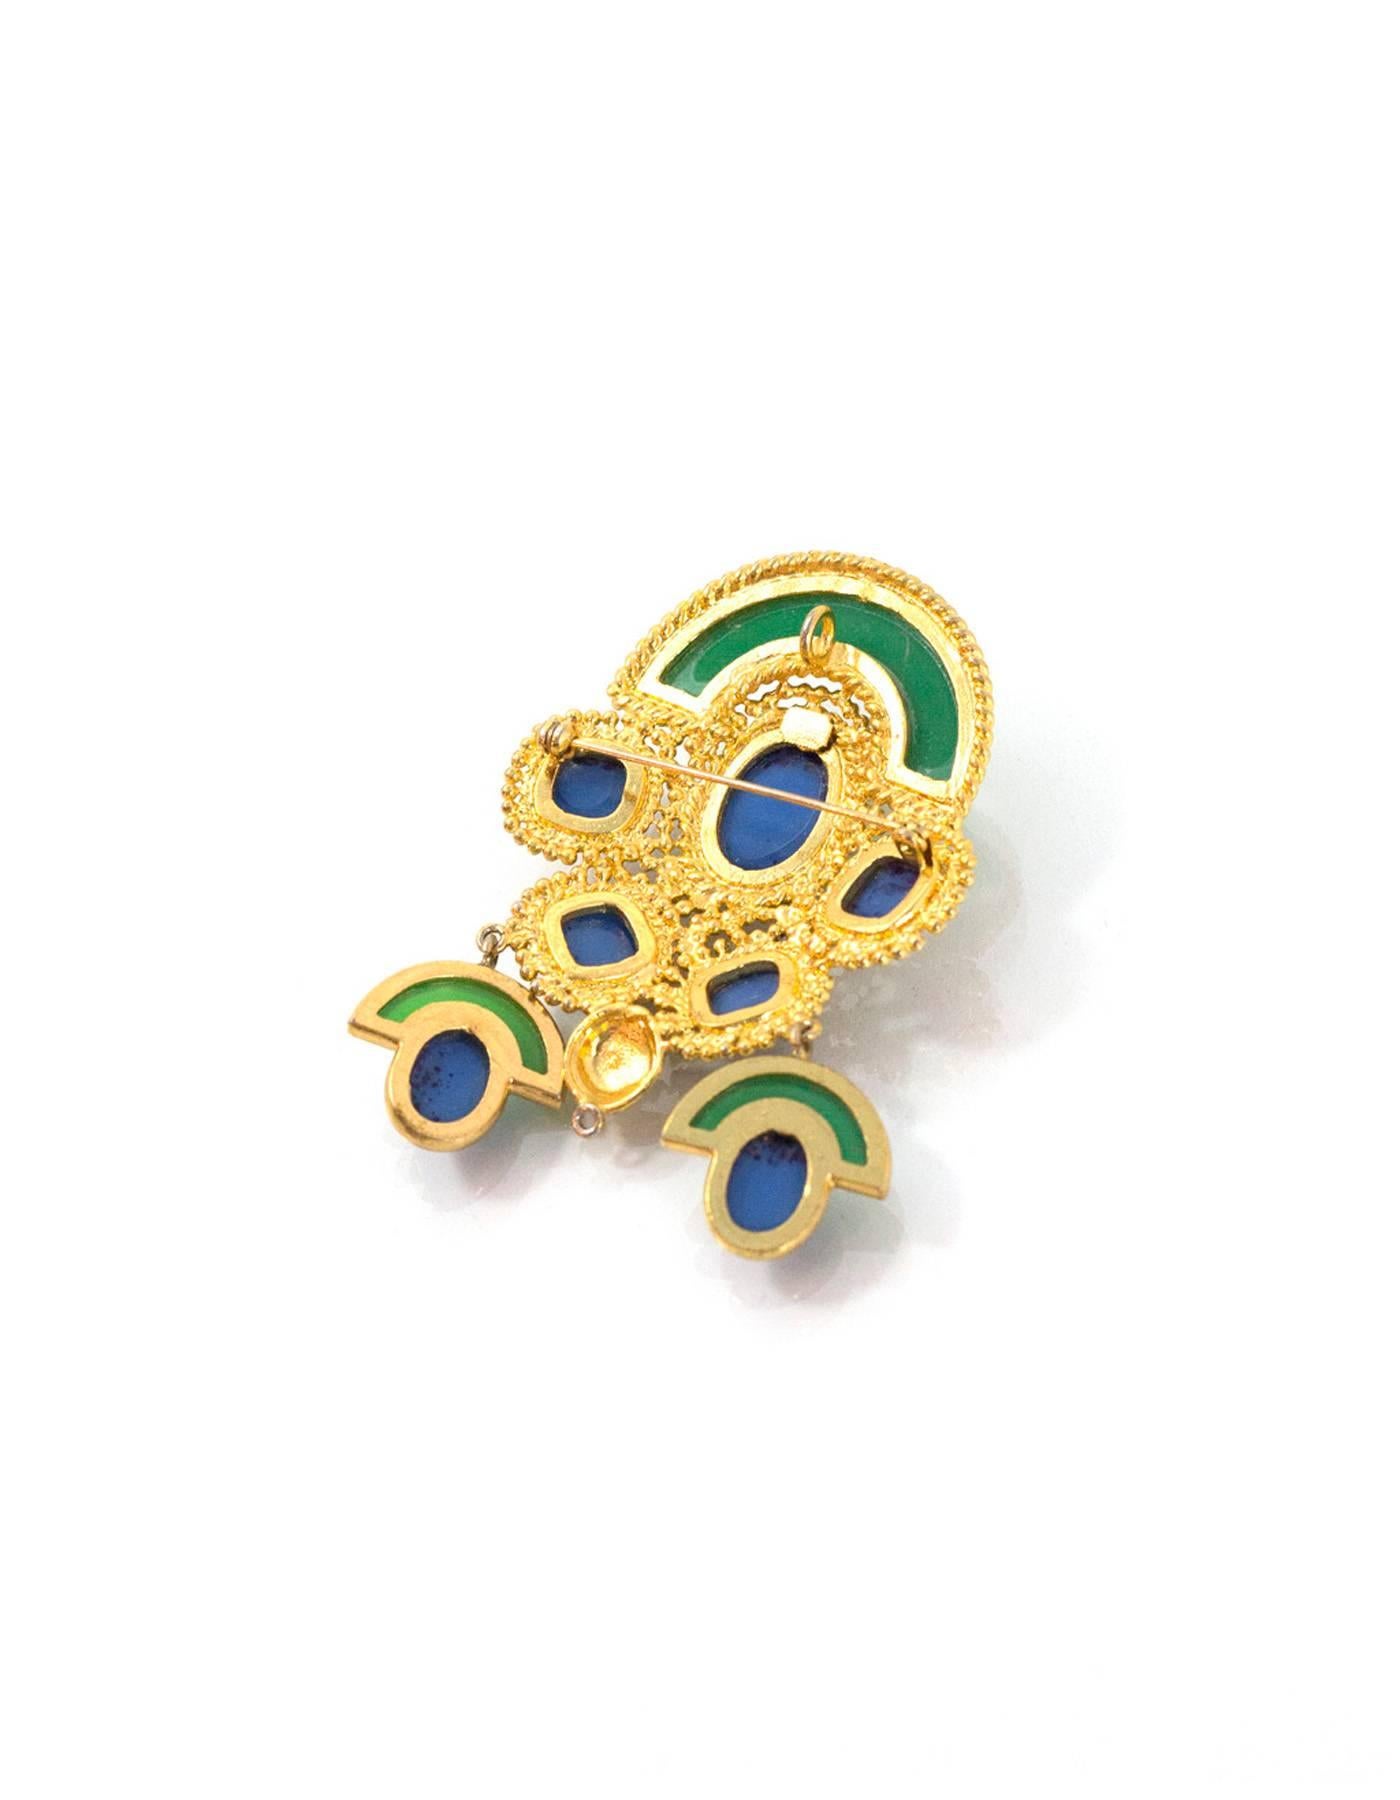 Christian Dior Vintage Gold Green & Lapis Brooch
Feaures two dangling pendants and has ring attached to back for wearing as a pendant on a necklace

Made In: Germany
Year of Production: 1971
Color: Goldtone green and blue
Materials: Metal,